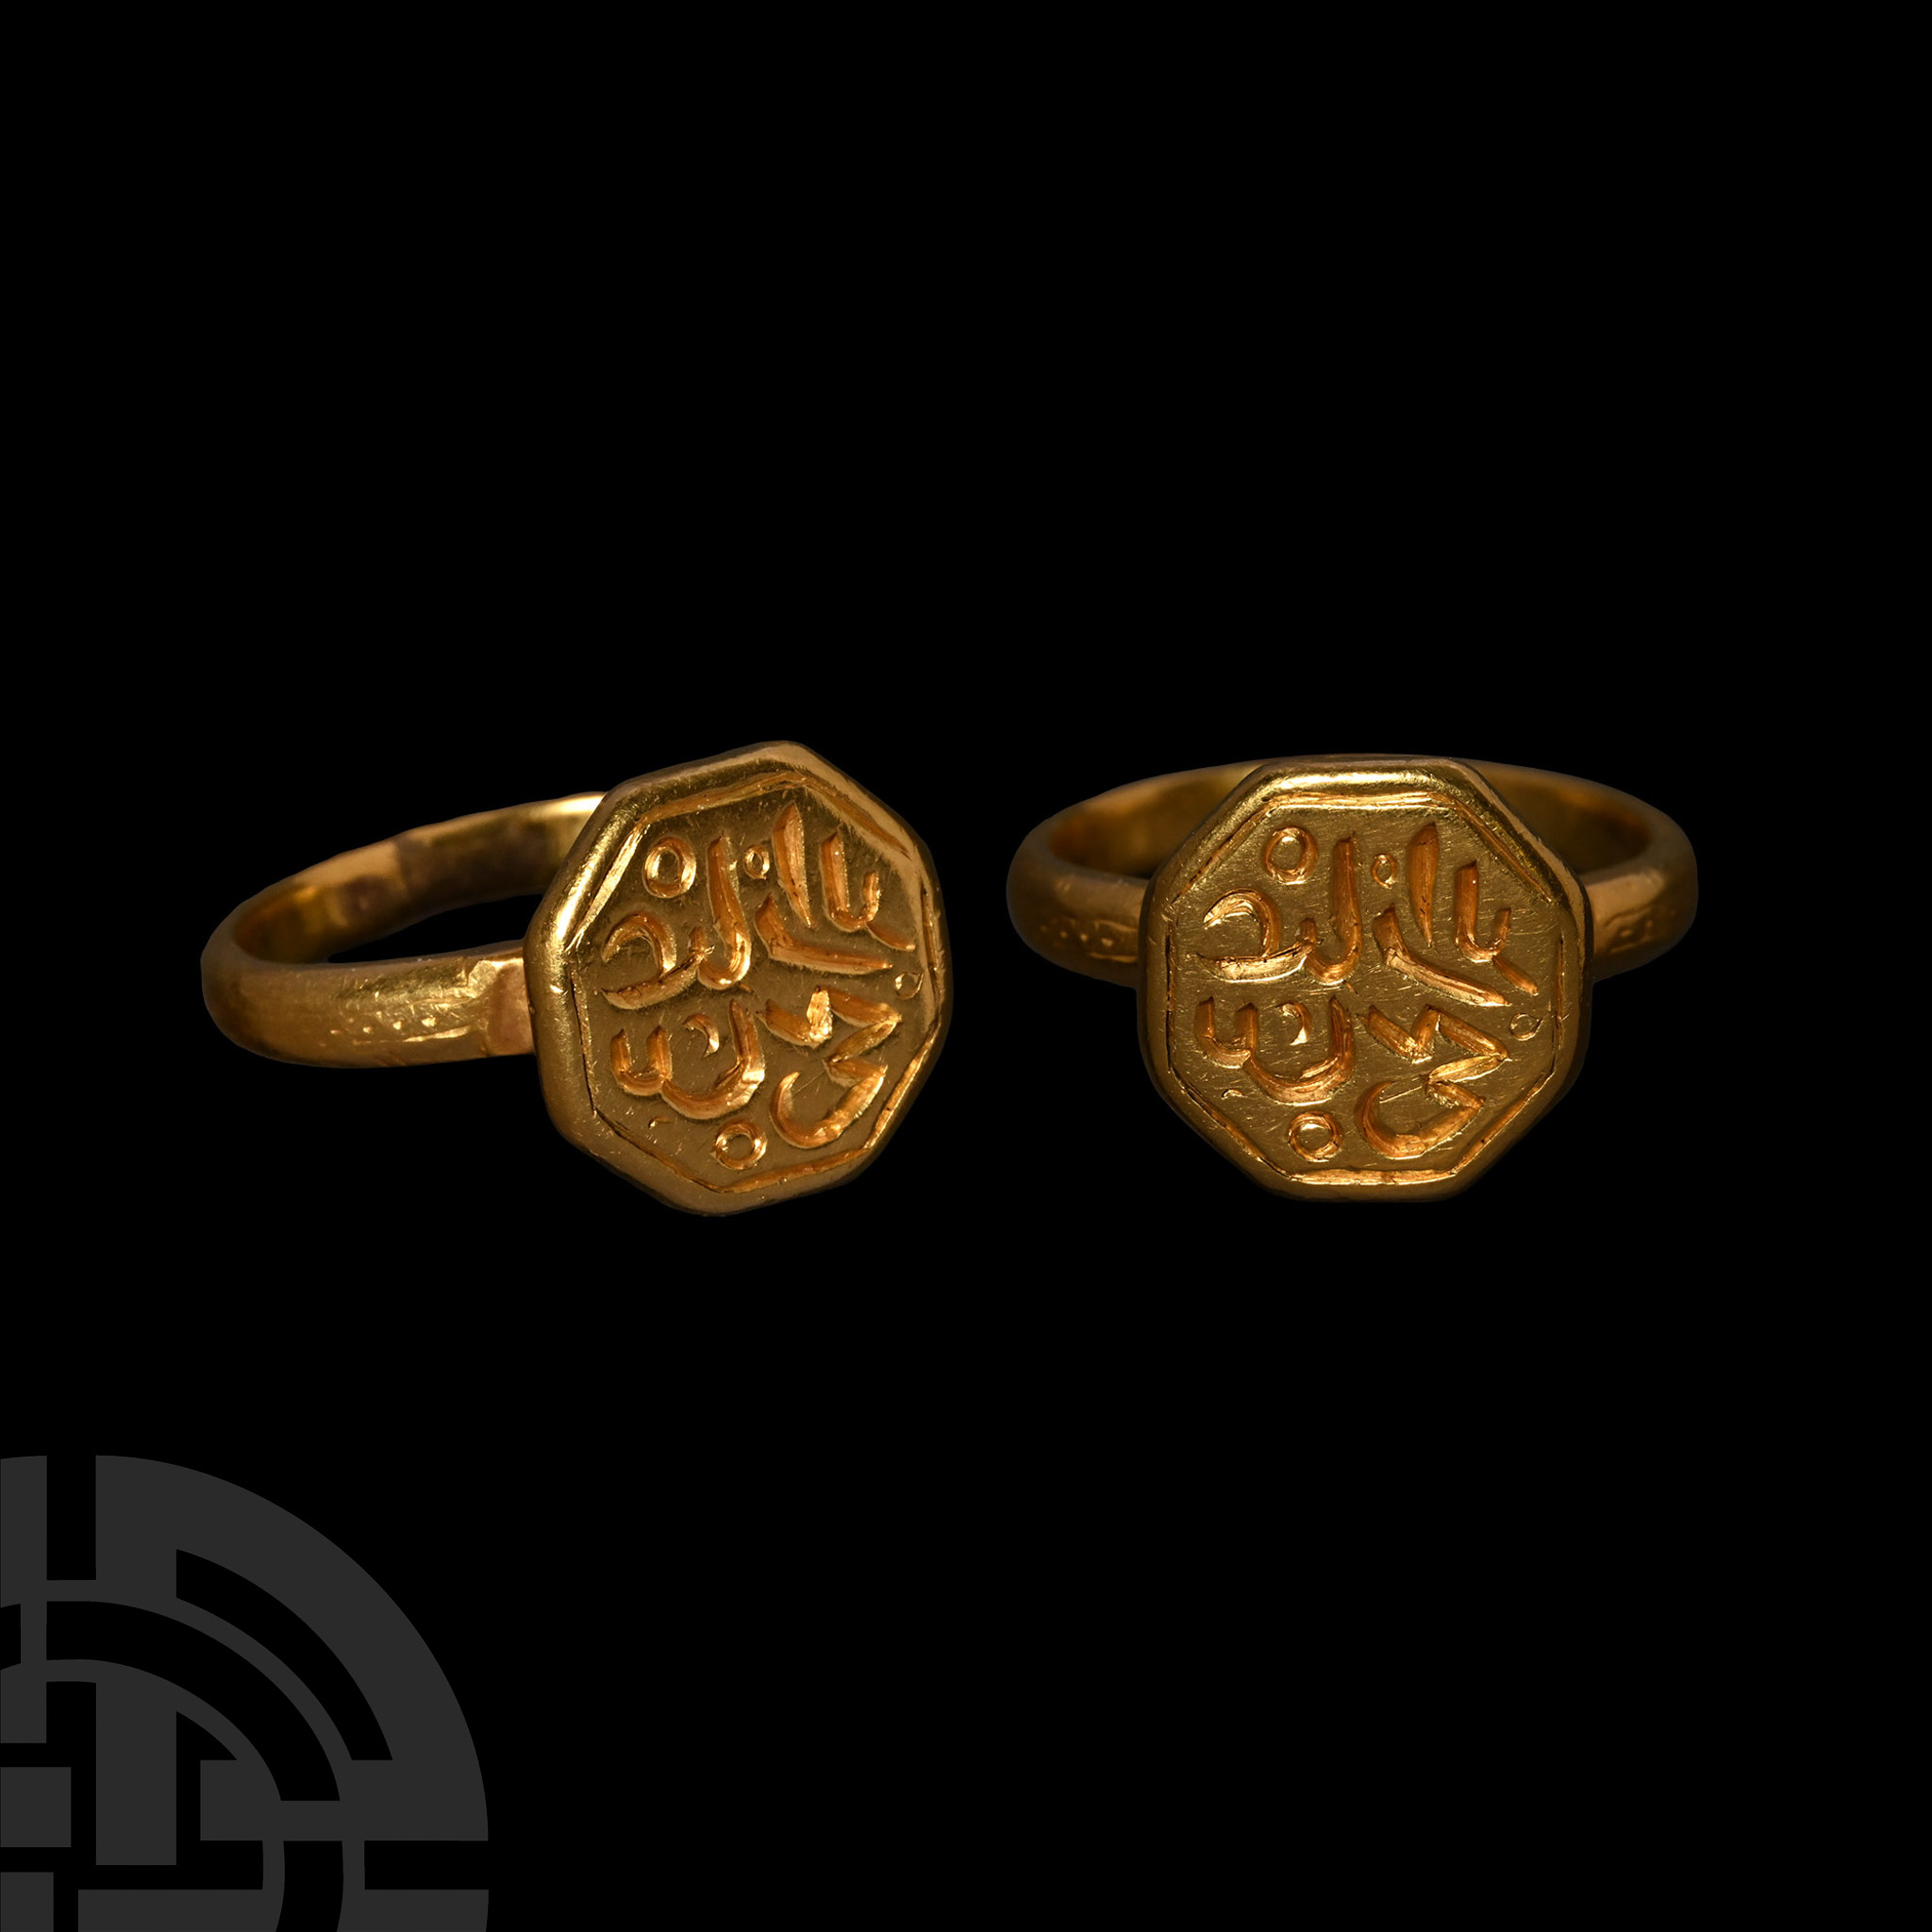 Medieval Gold Signet Ring with Hexagonal Bezel Engraved with an Arabic Inscription